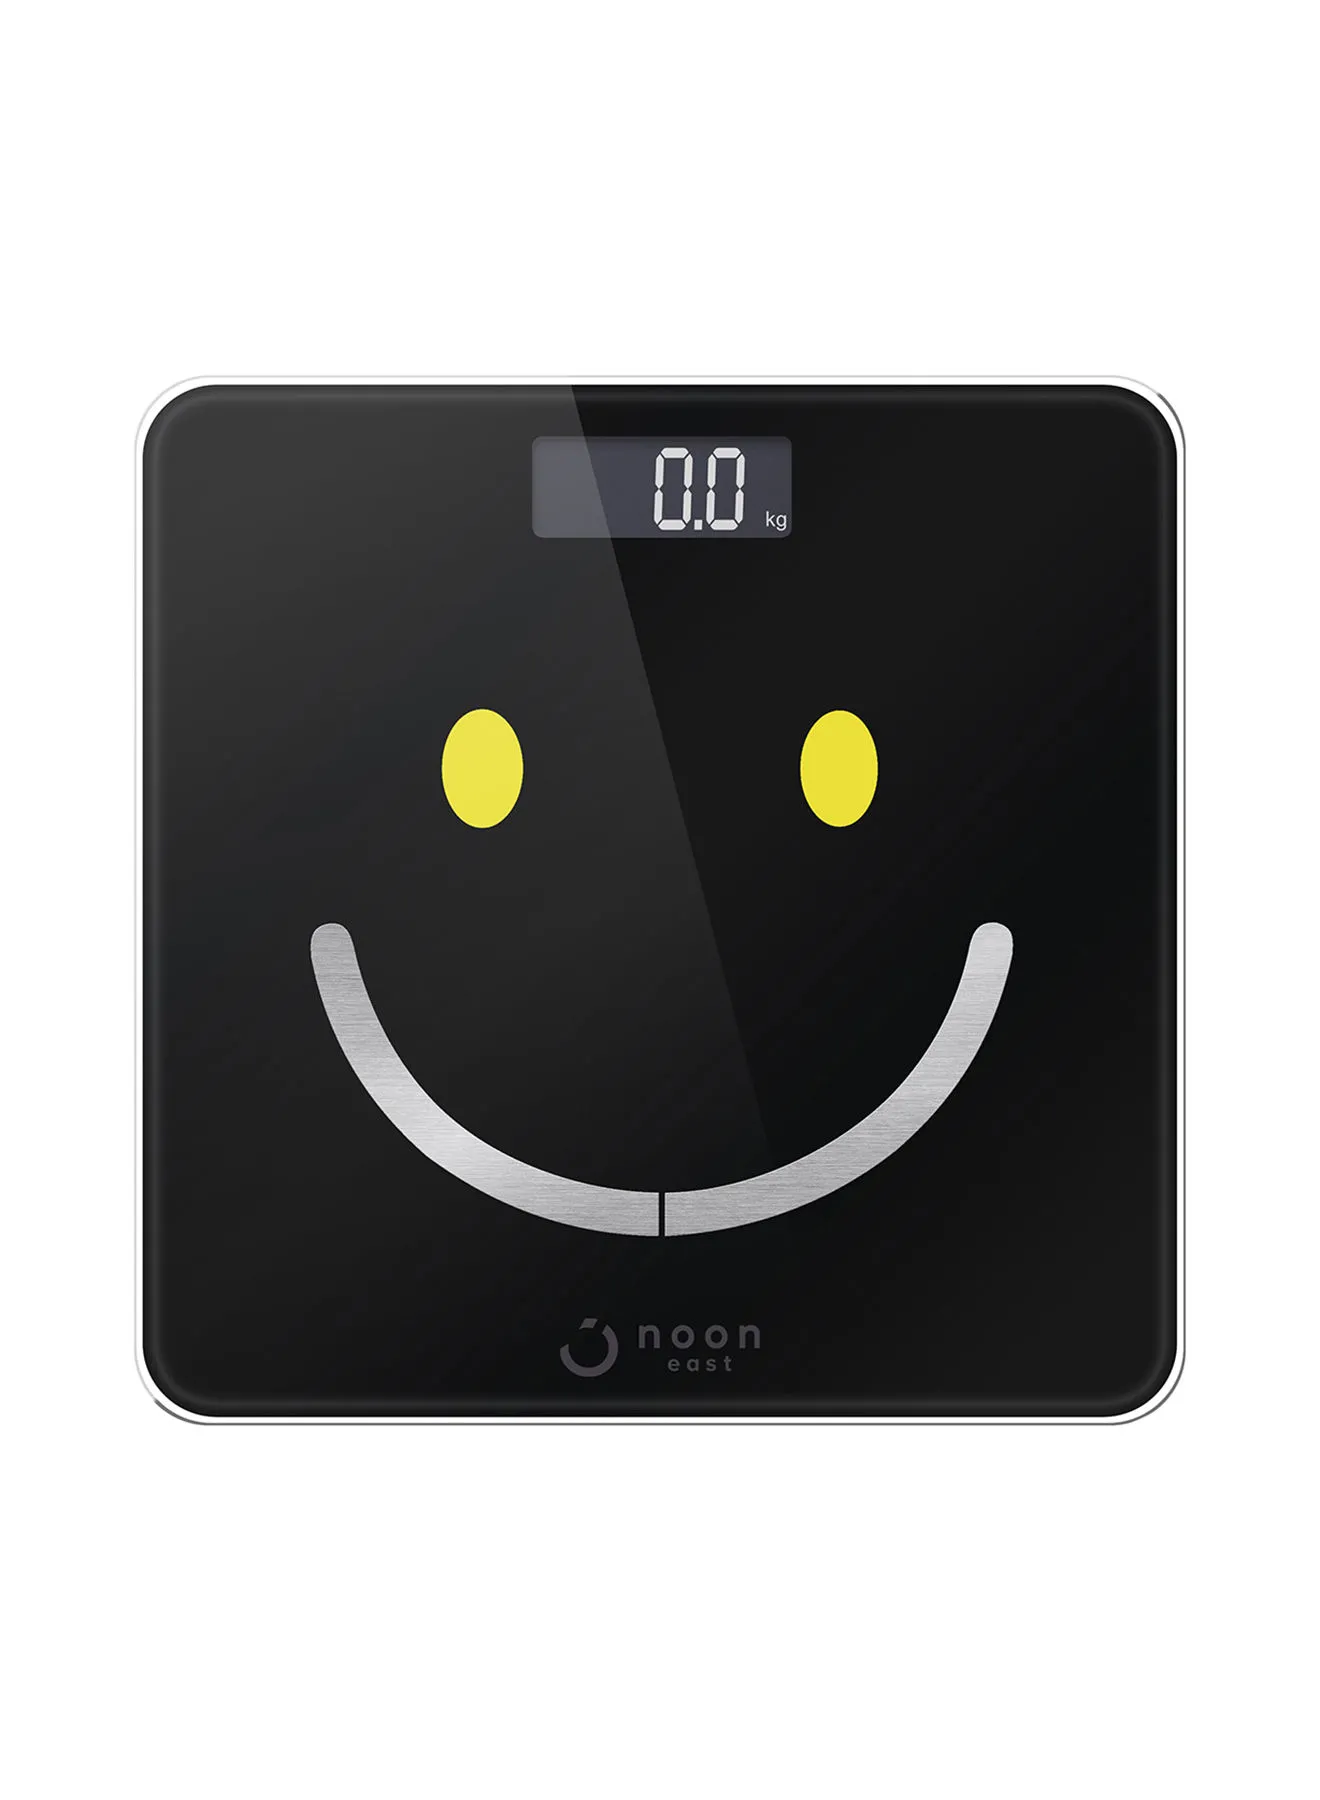 noon east Body Scale - Lcd Smart Scale Display 30X30 Cm Black Color - Balance Weight Scale